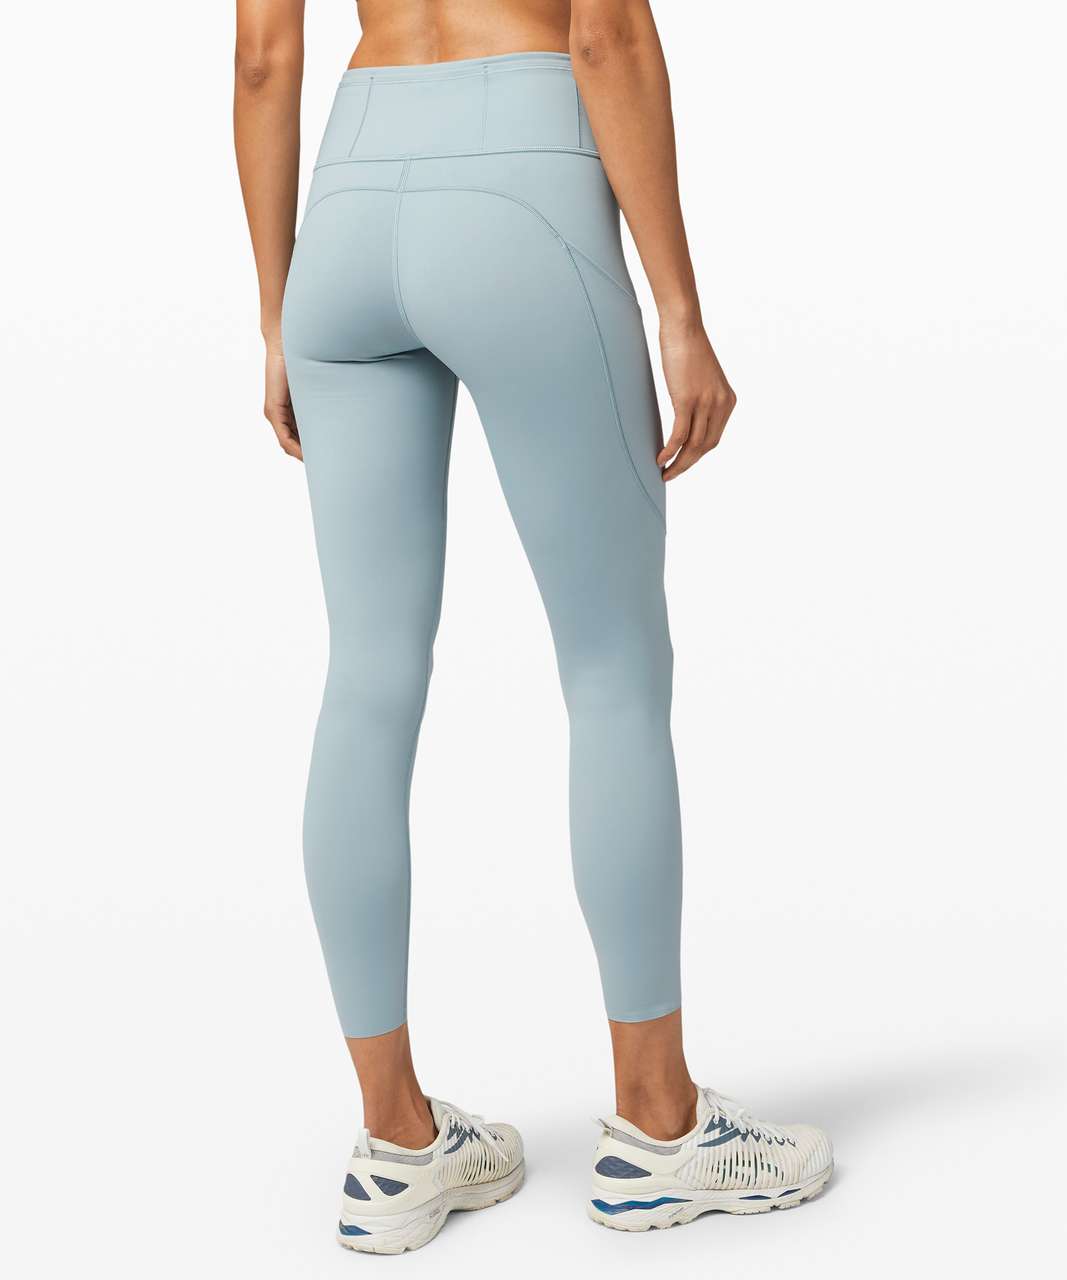 Lululemon Fast and Free Tights 25” Larkspur Size 6, Women's